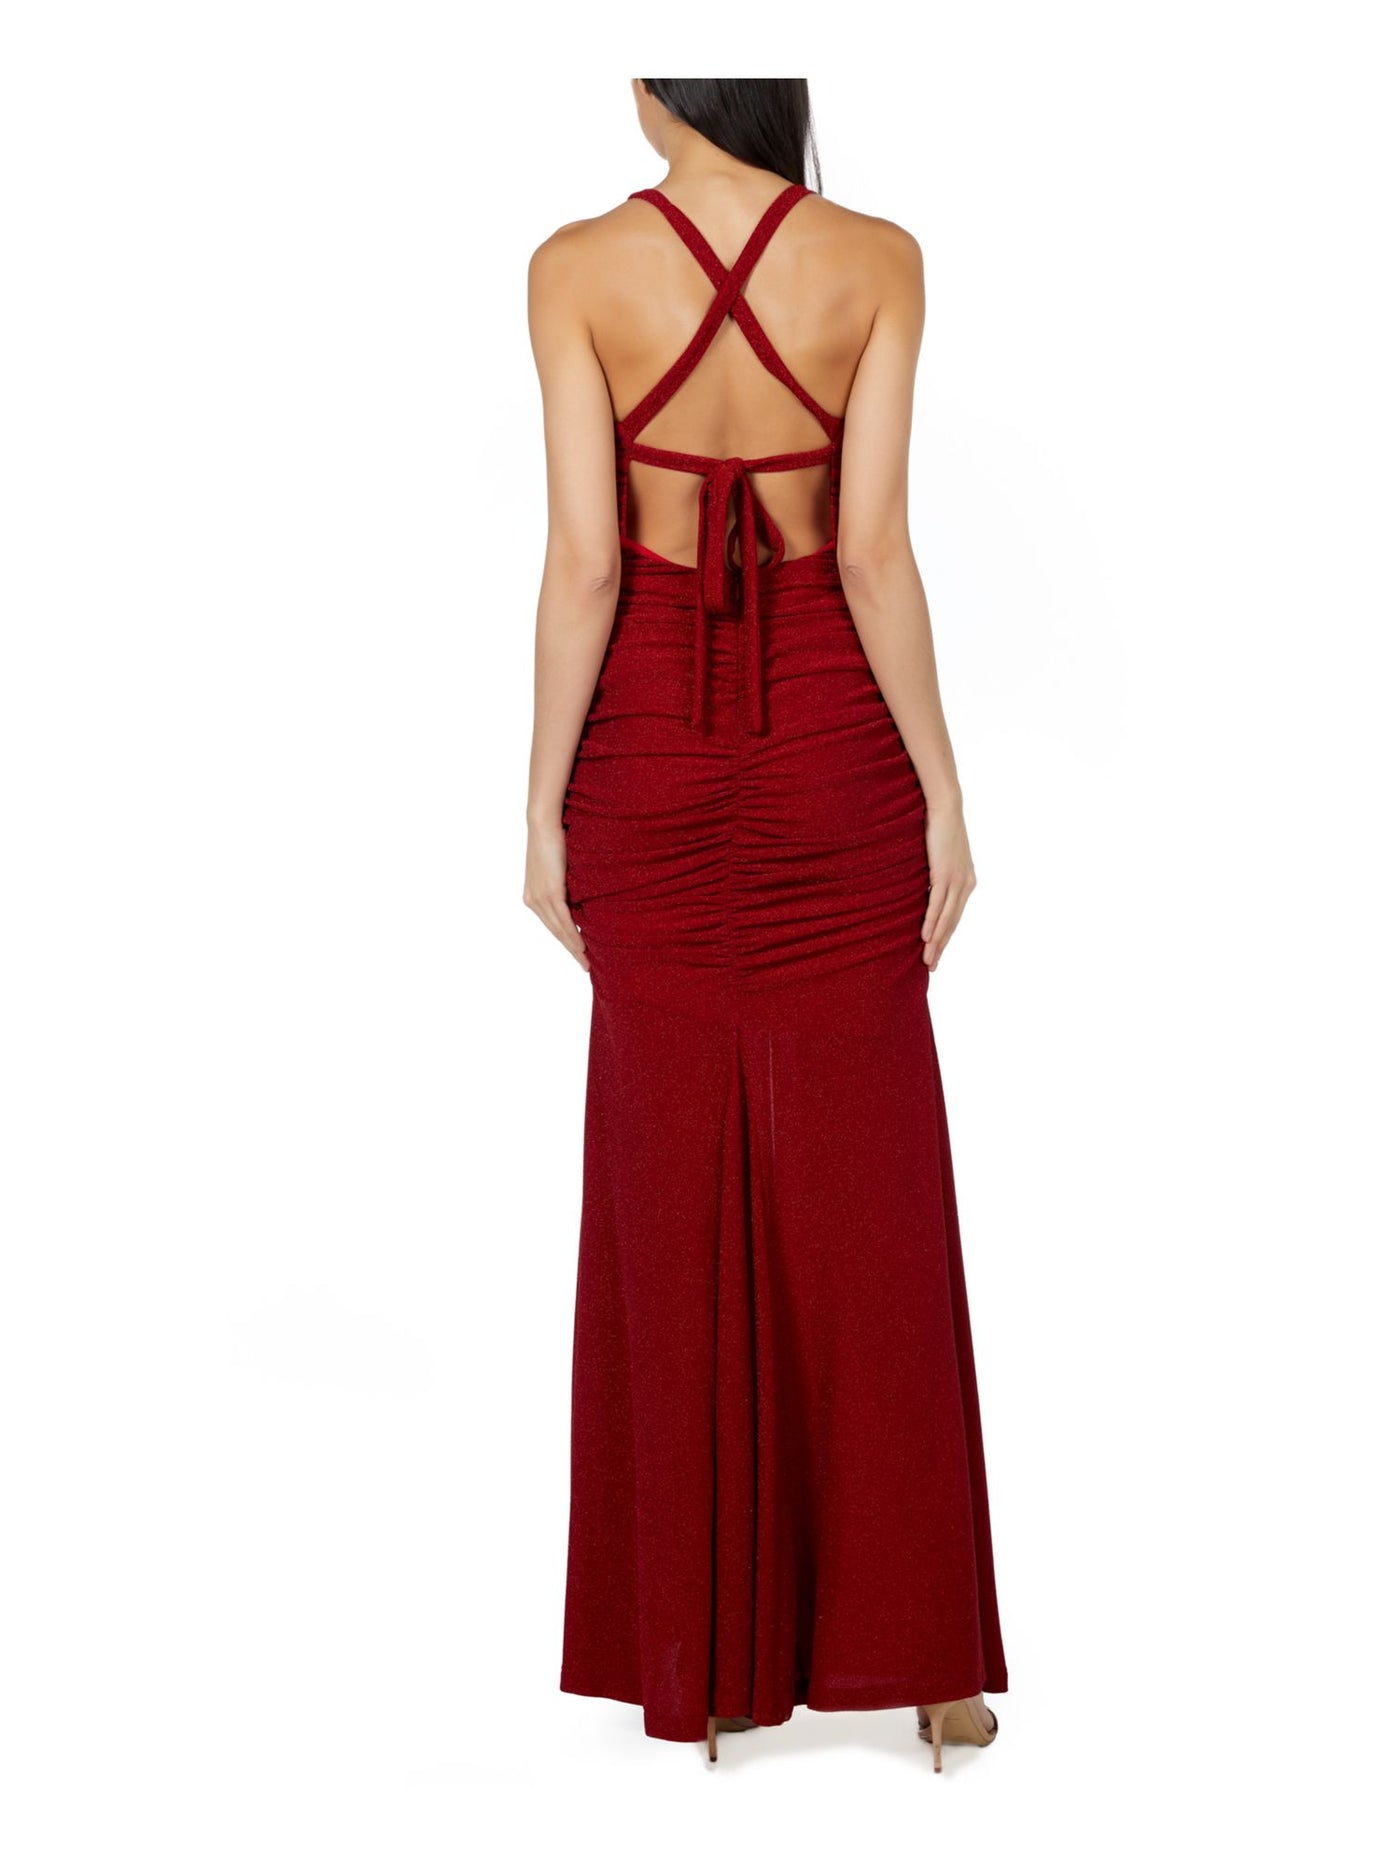 JUMP APPAREL Womens Red Stretch Zippered Glitter Ruched Sleeveless V Neck Maxi Formal Gown Dress Juniors 17/18